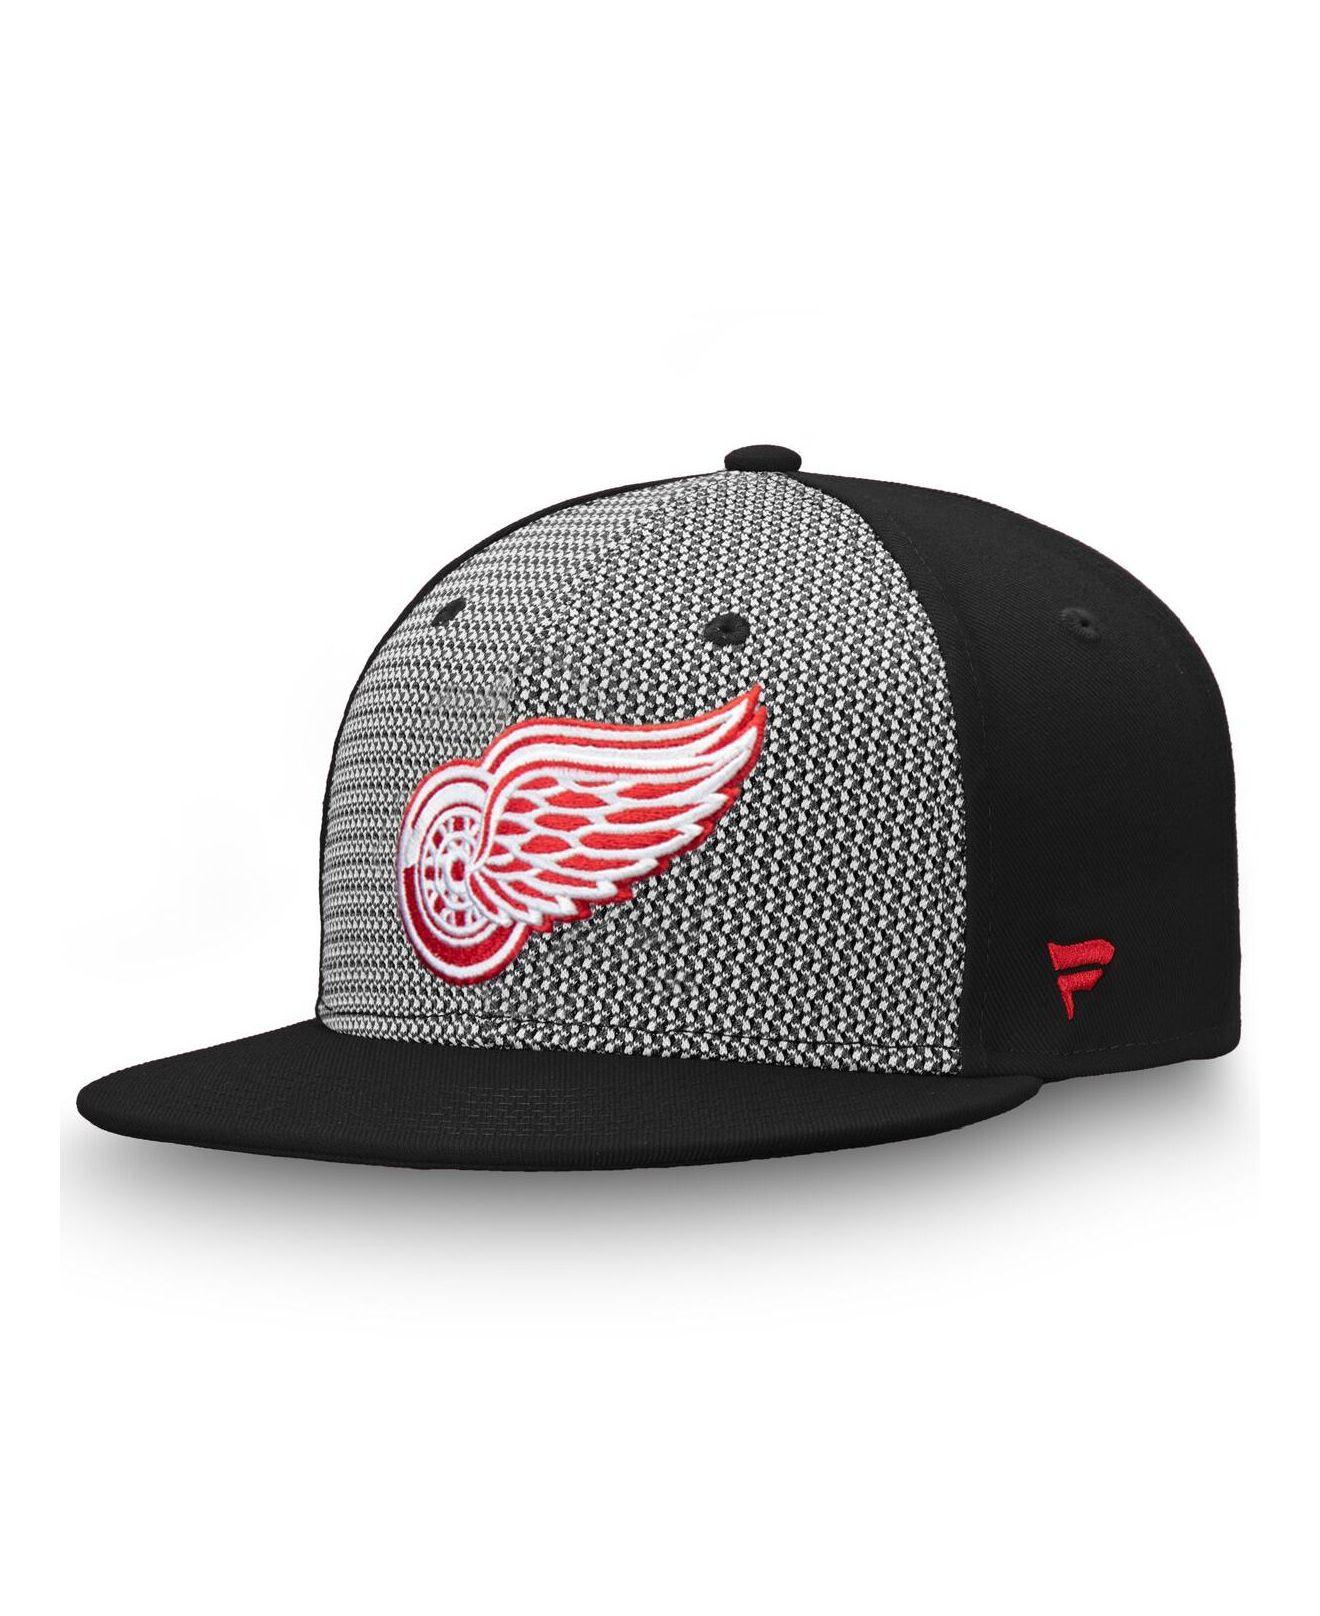 Detroit Red Wings Fanatics Branded Authentic Pro Home Ice Flex Hat